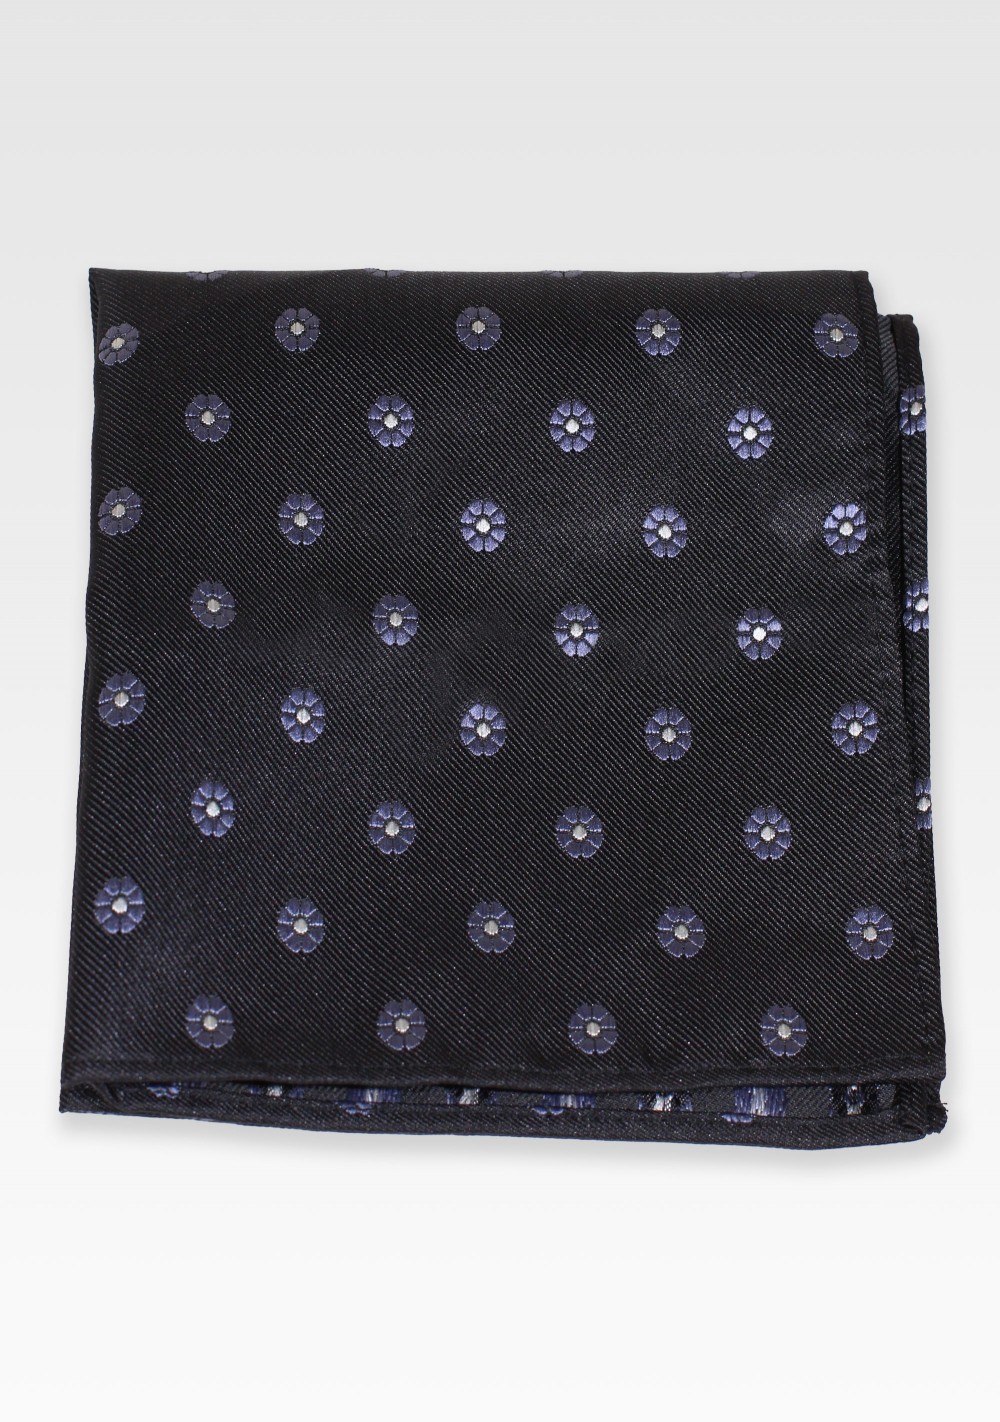 Classy Black Pocket Square with Embroidered Flowers